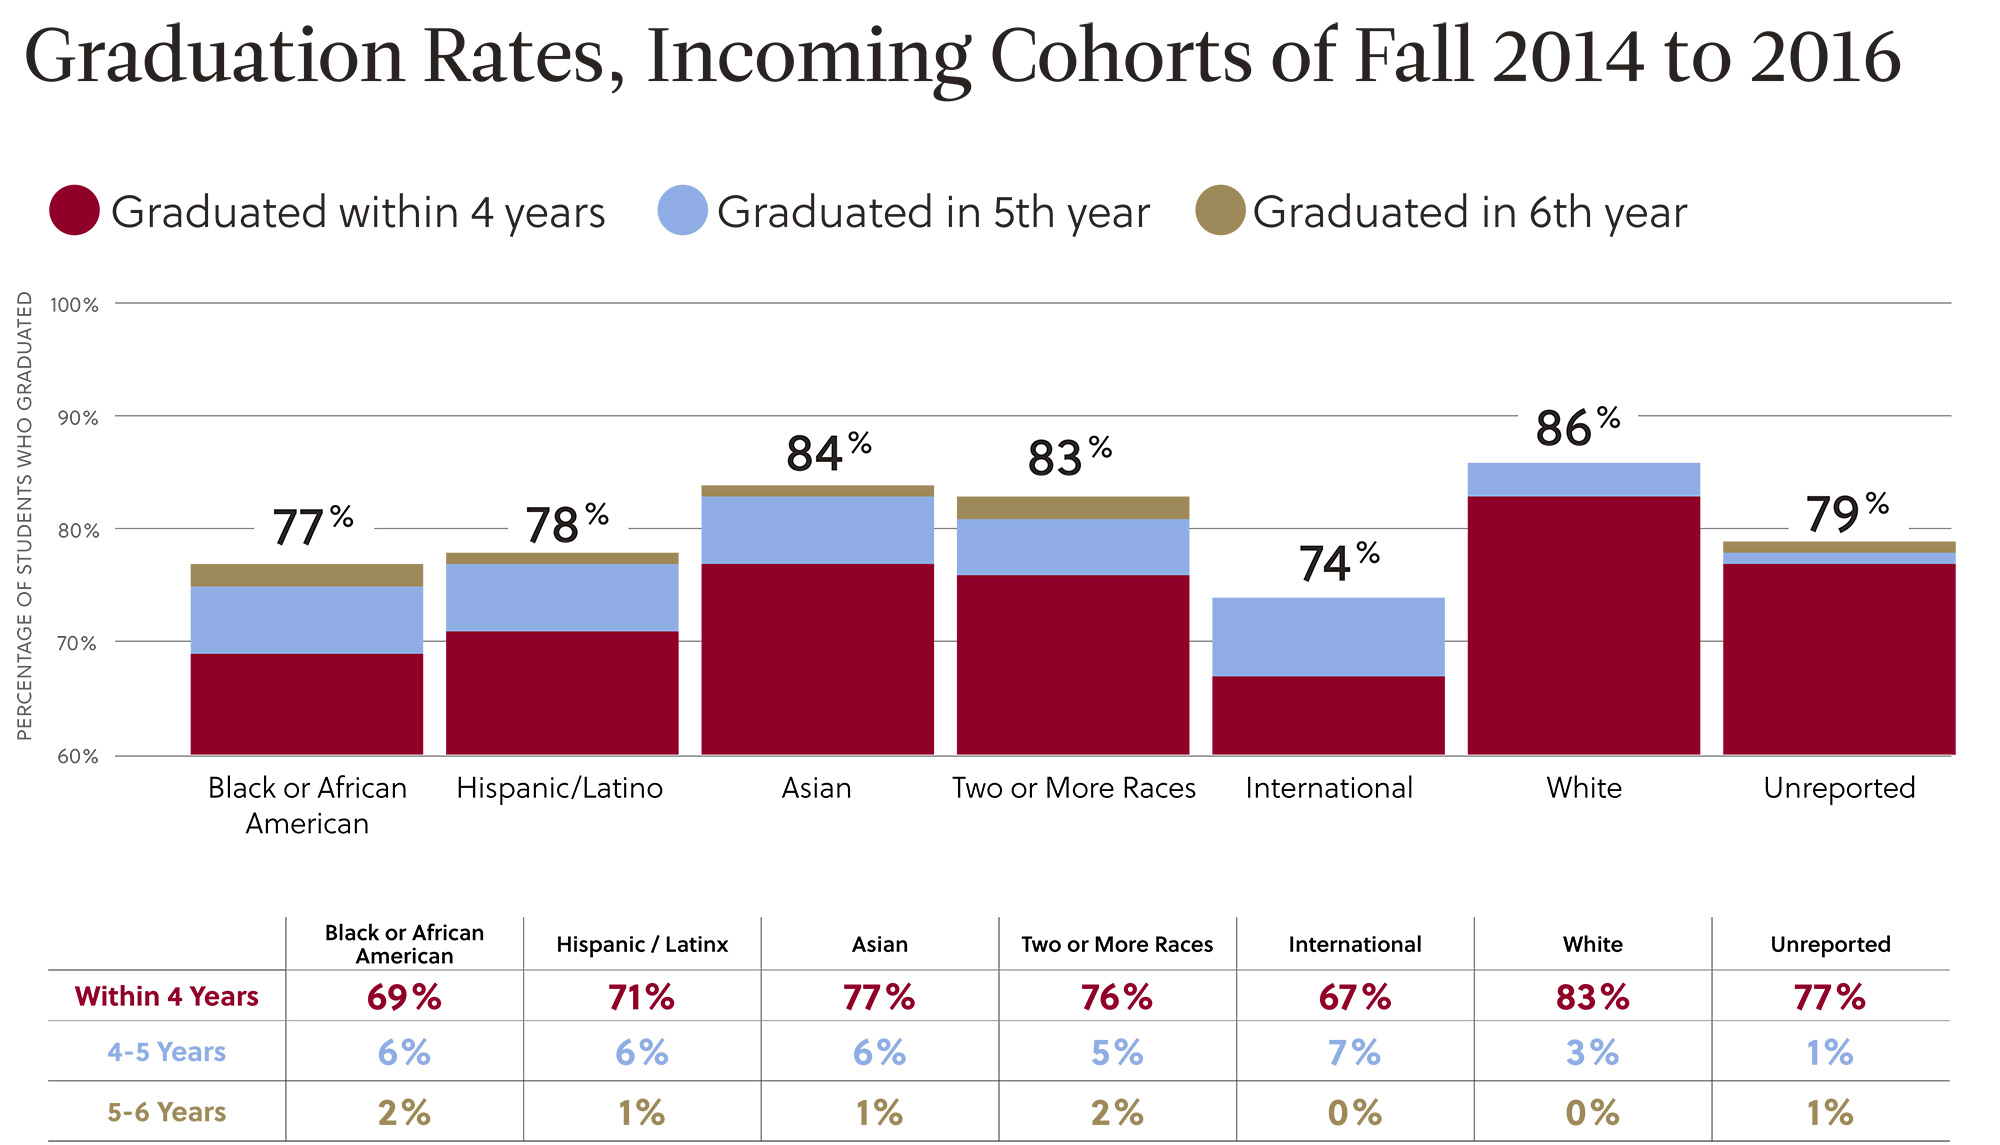 Graduation Rates, Incoming Cohorts of Fall 2014 to 2016